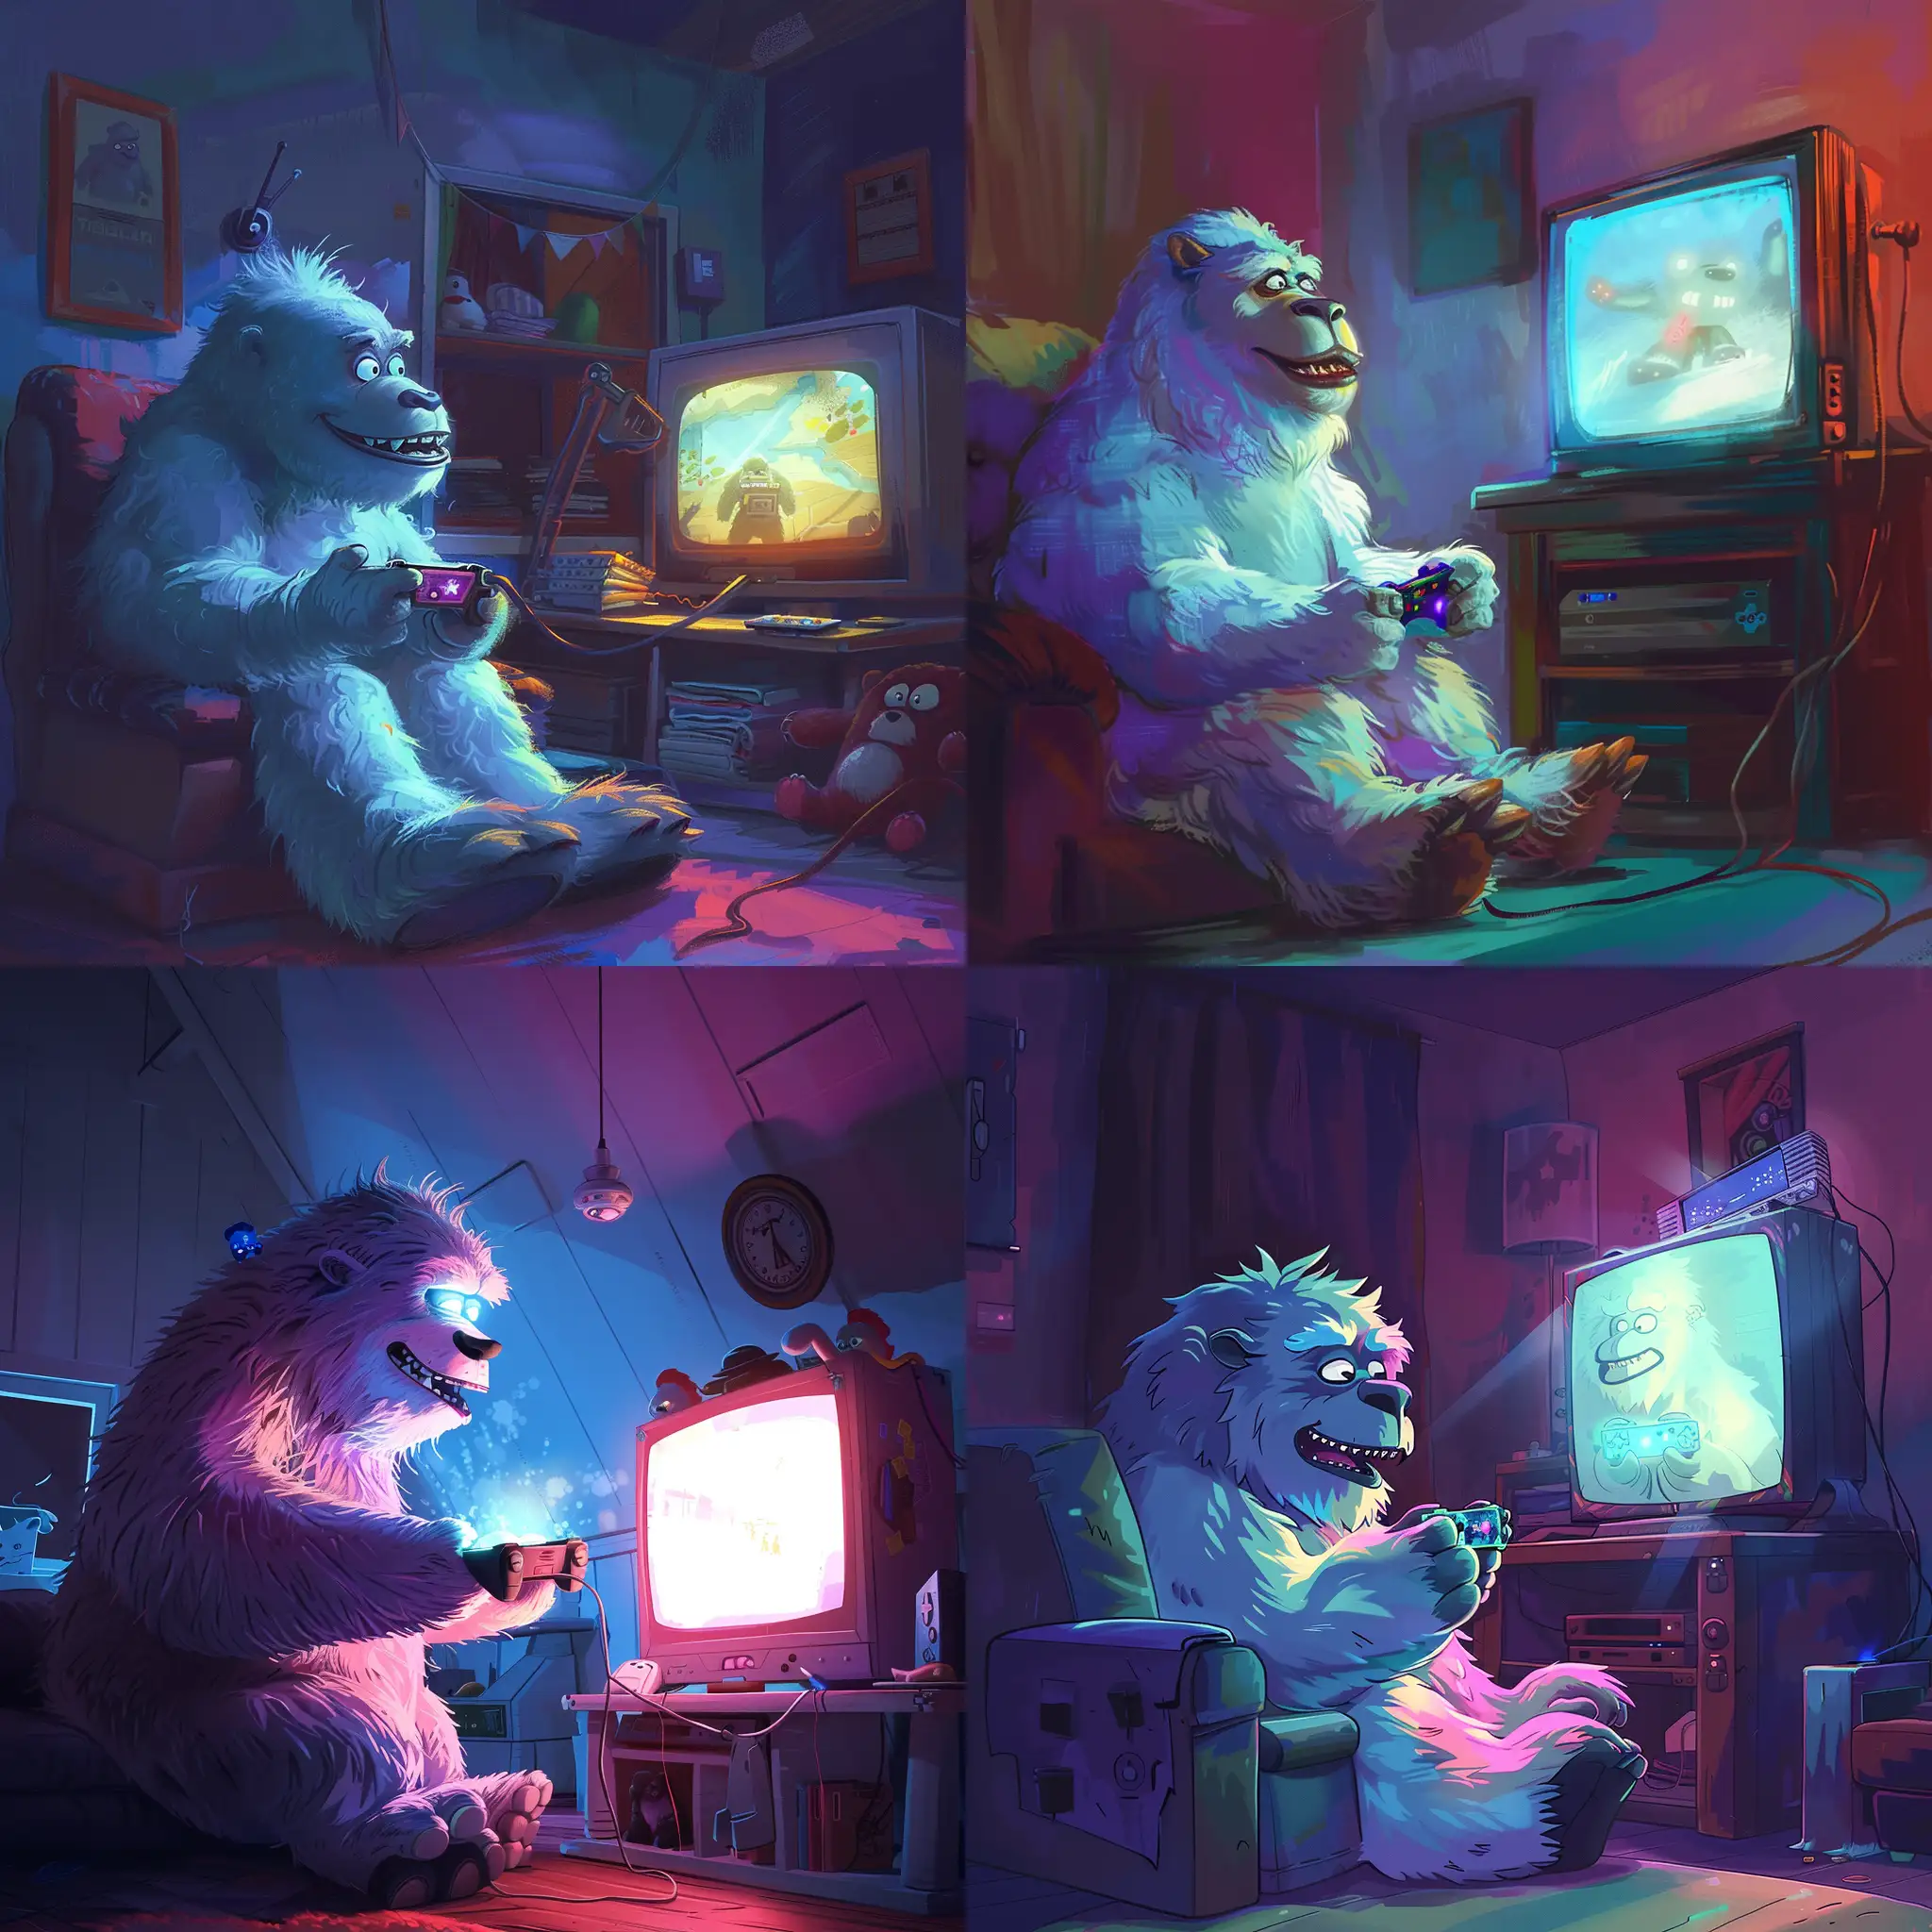 a yeti in a room, playing videogames, only light source is coming from the tv, light hearted, colorful